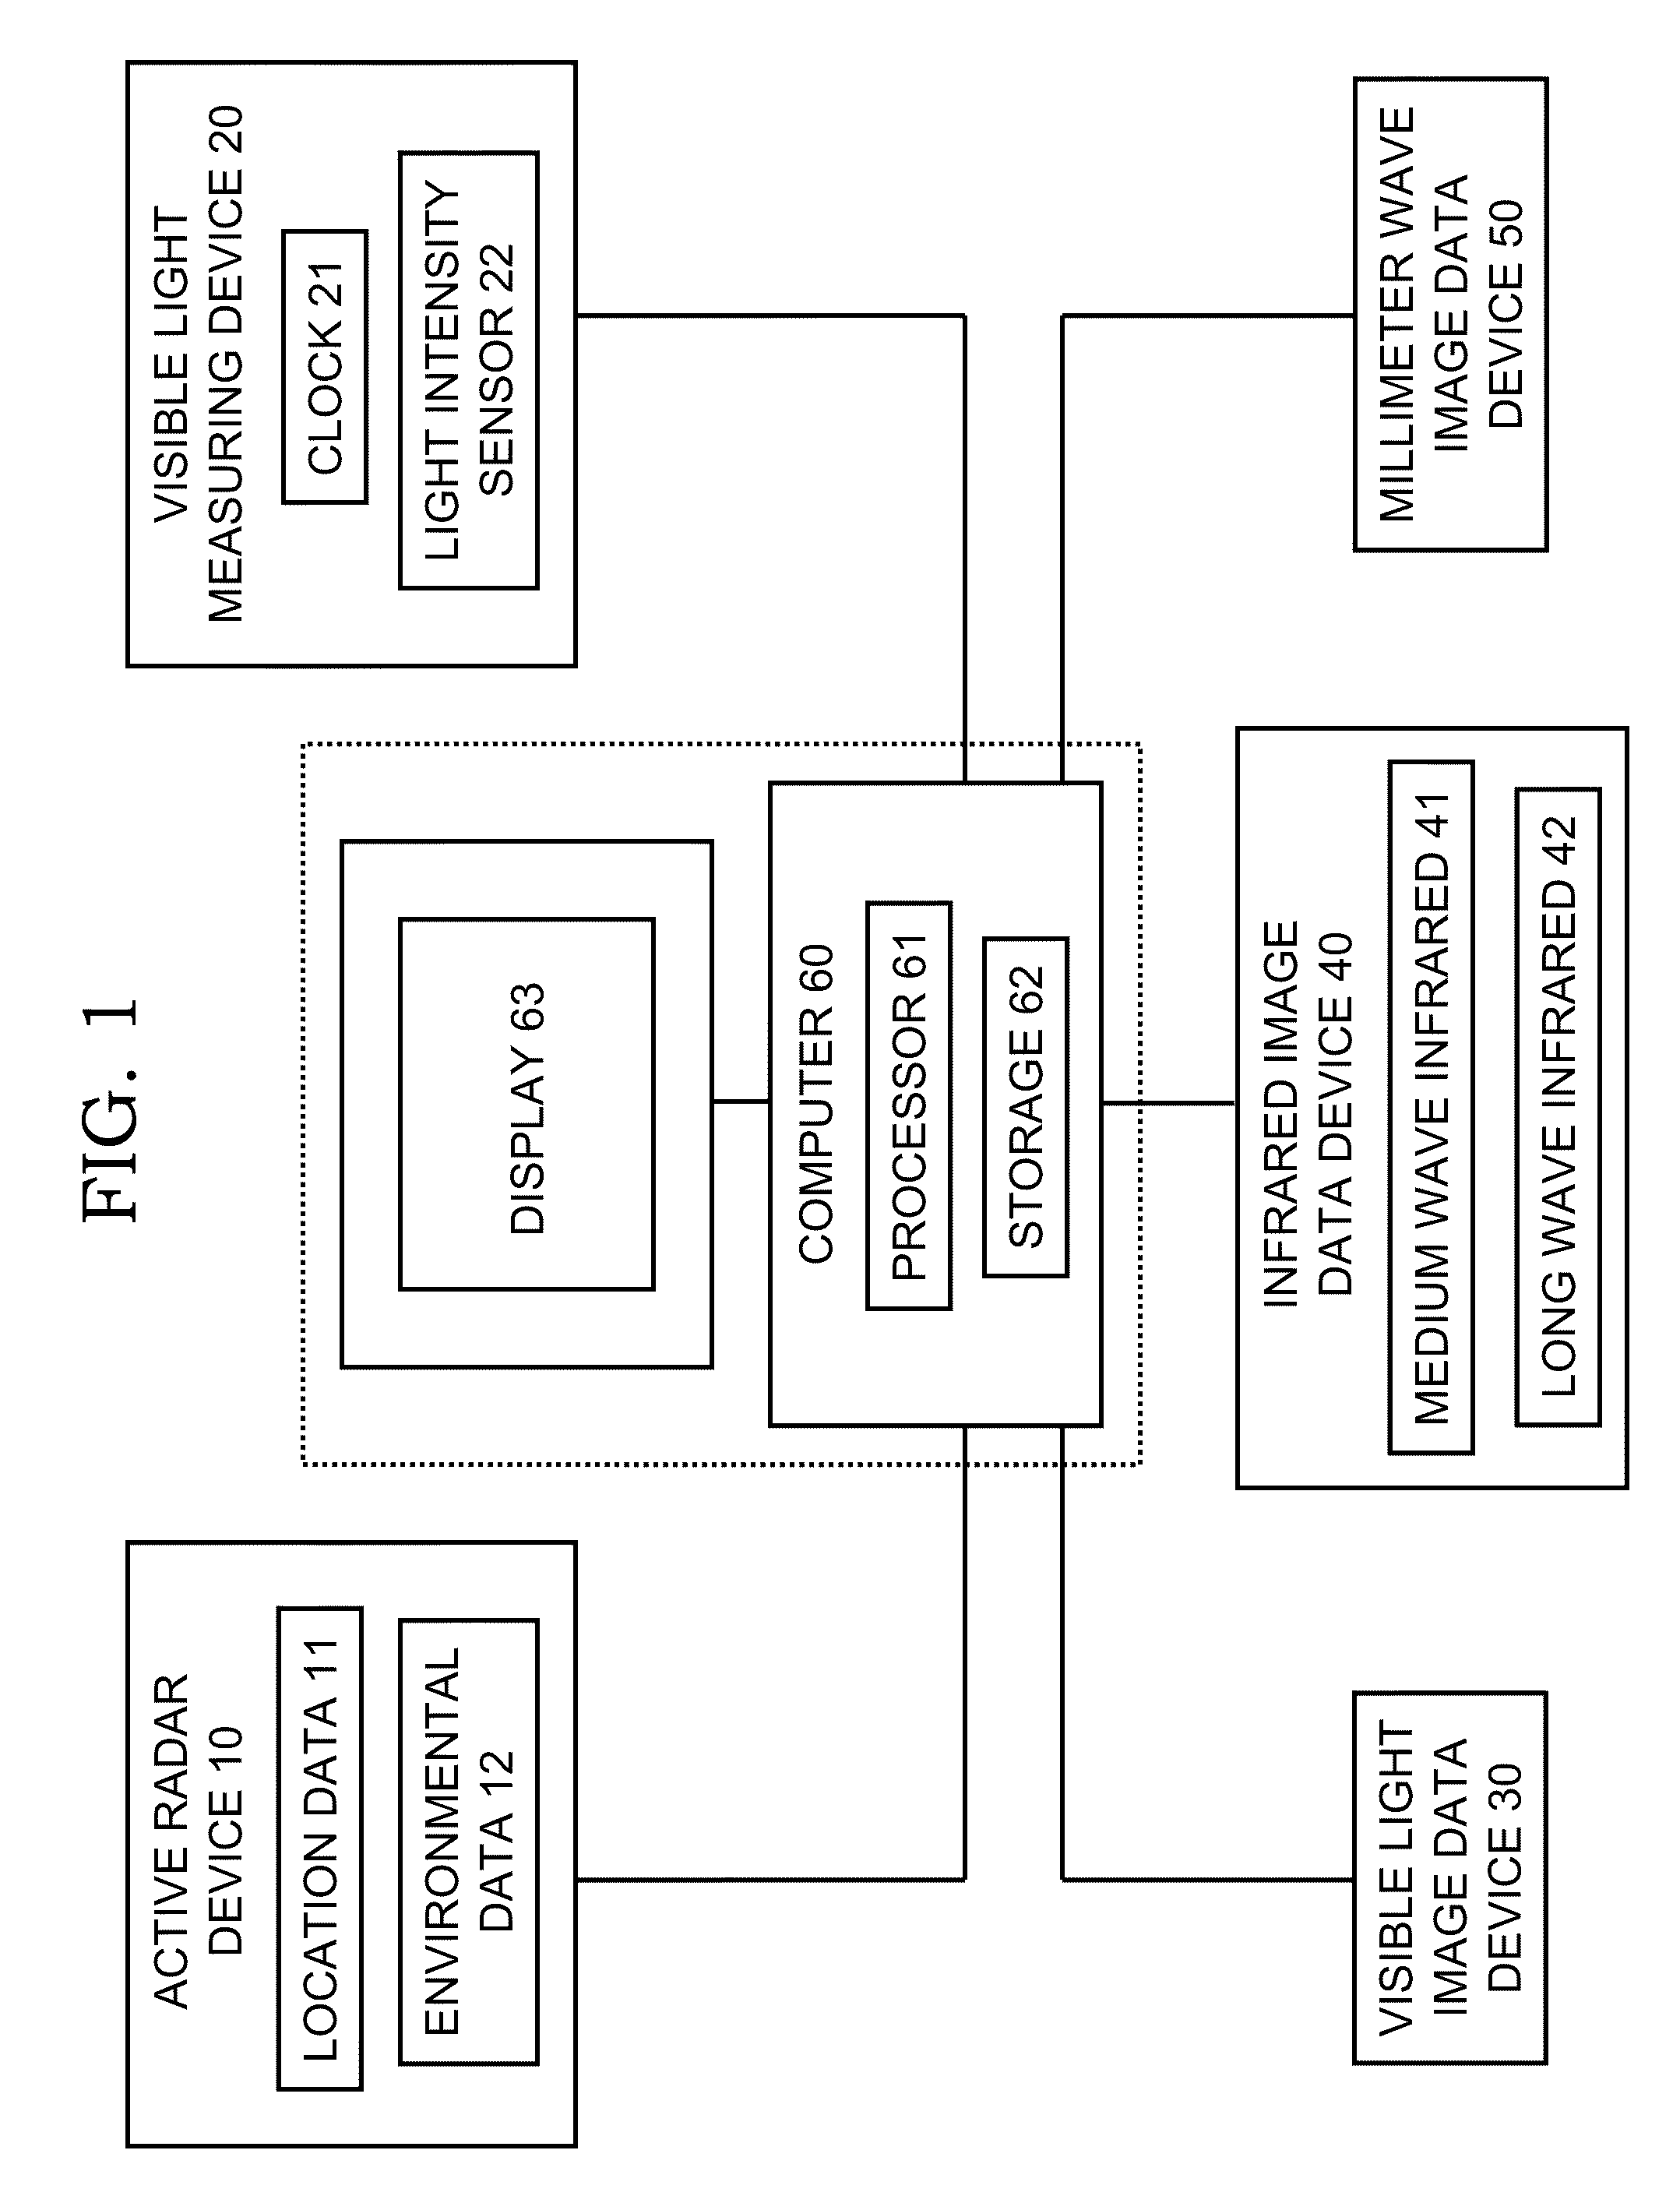 Active-radar-assisted passive composite imagery for aiding navigation or detecting threats